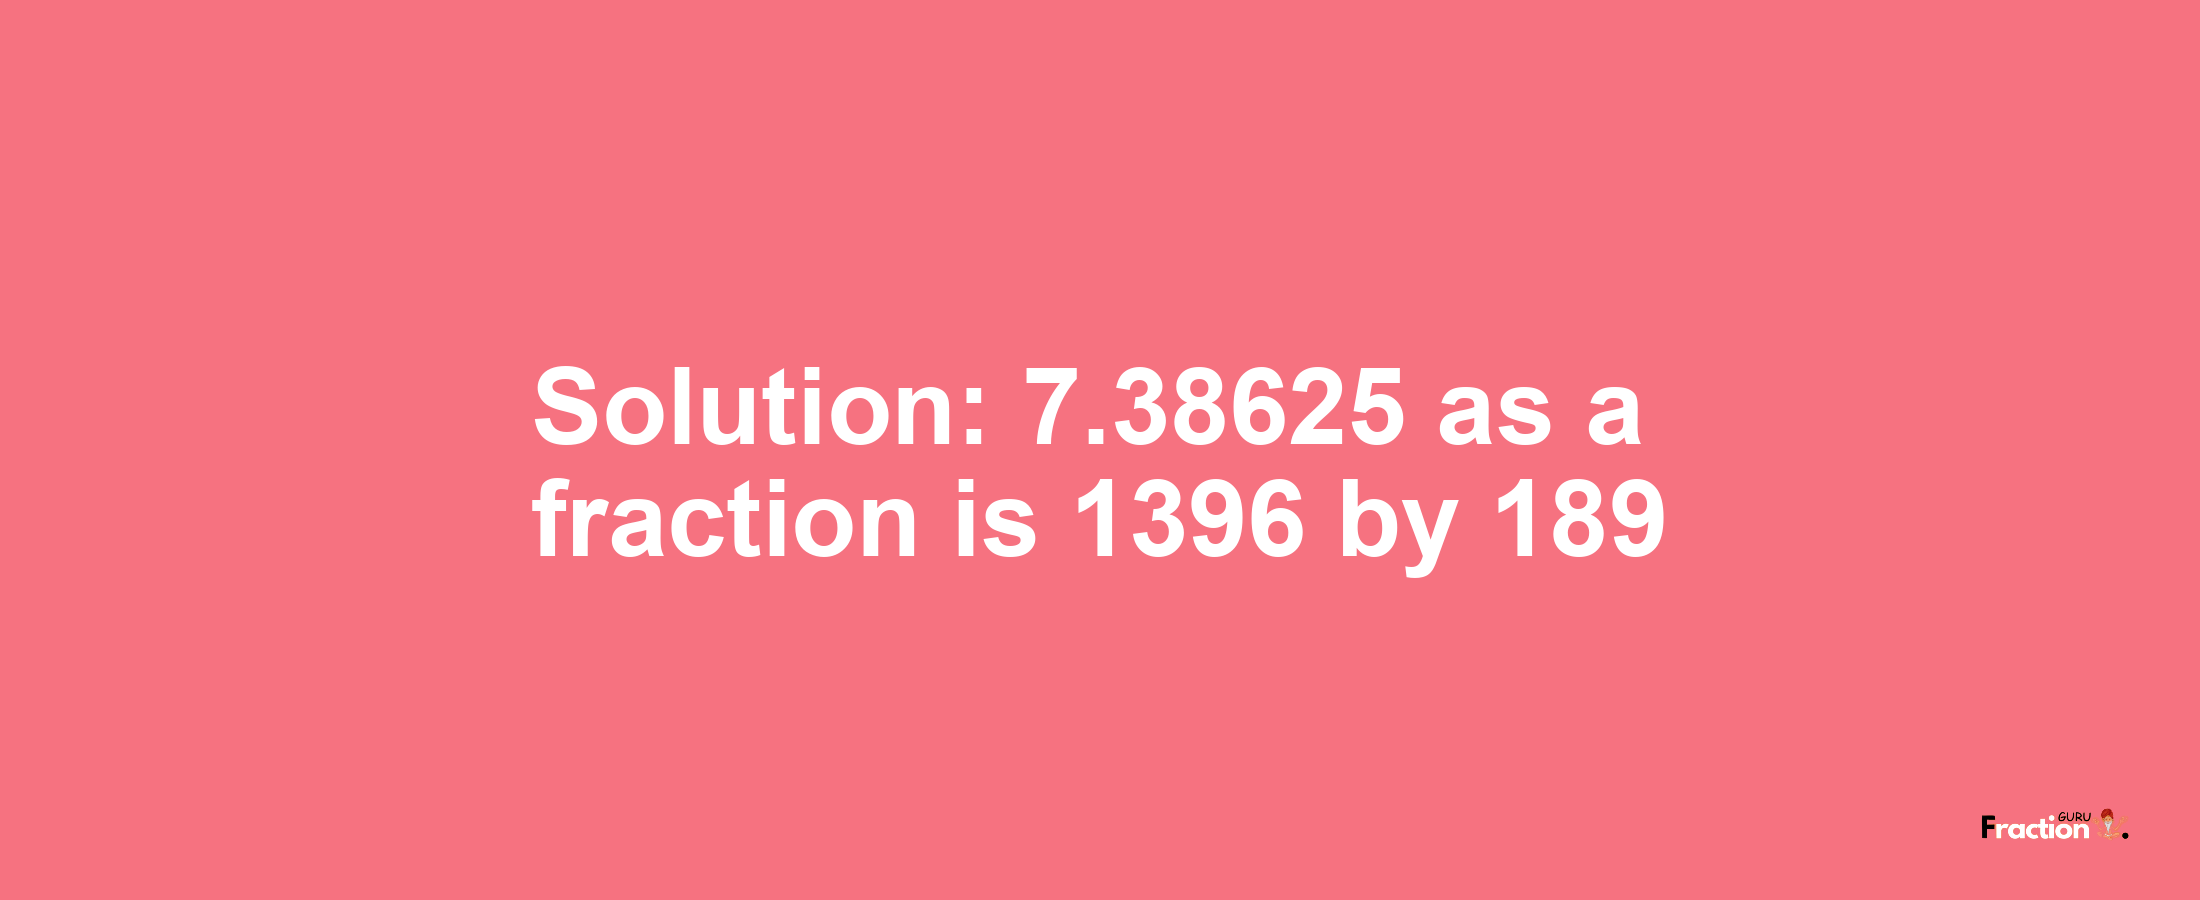 Solution:7.38625 as a fraction is 1396/189